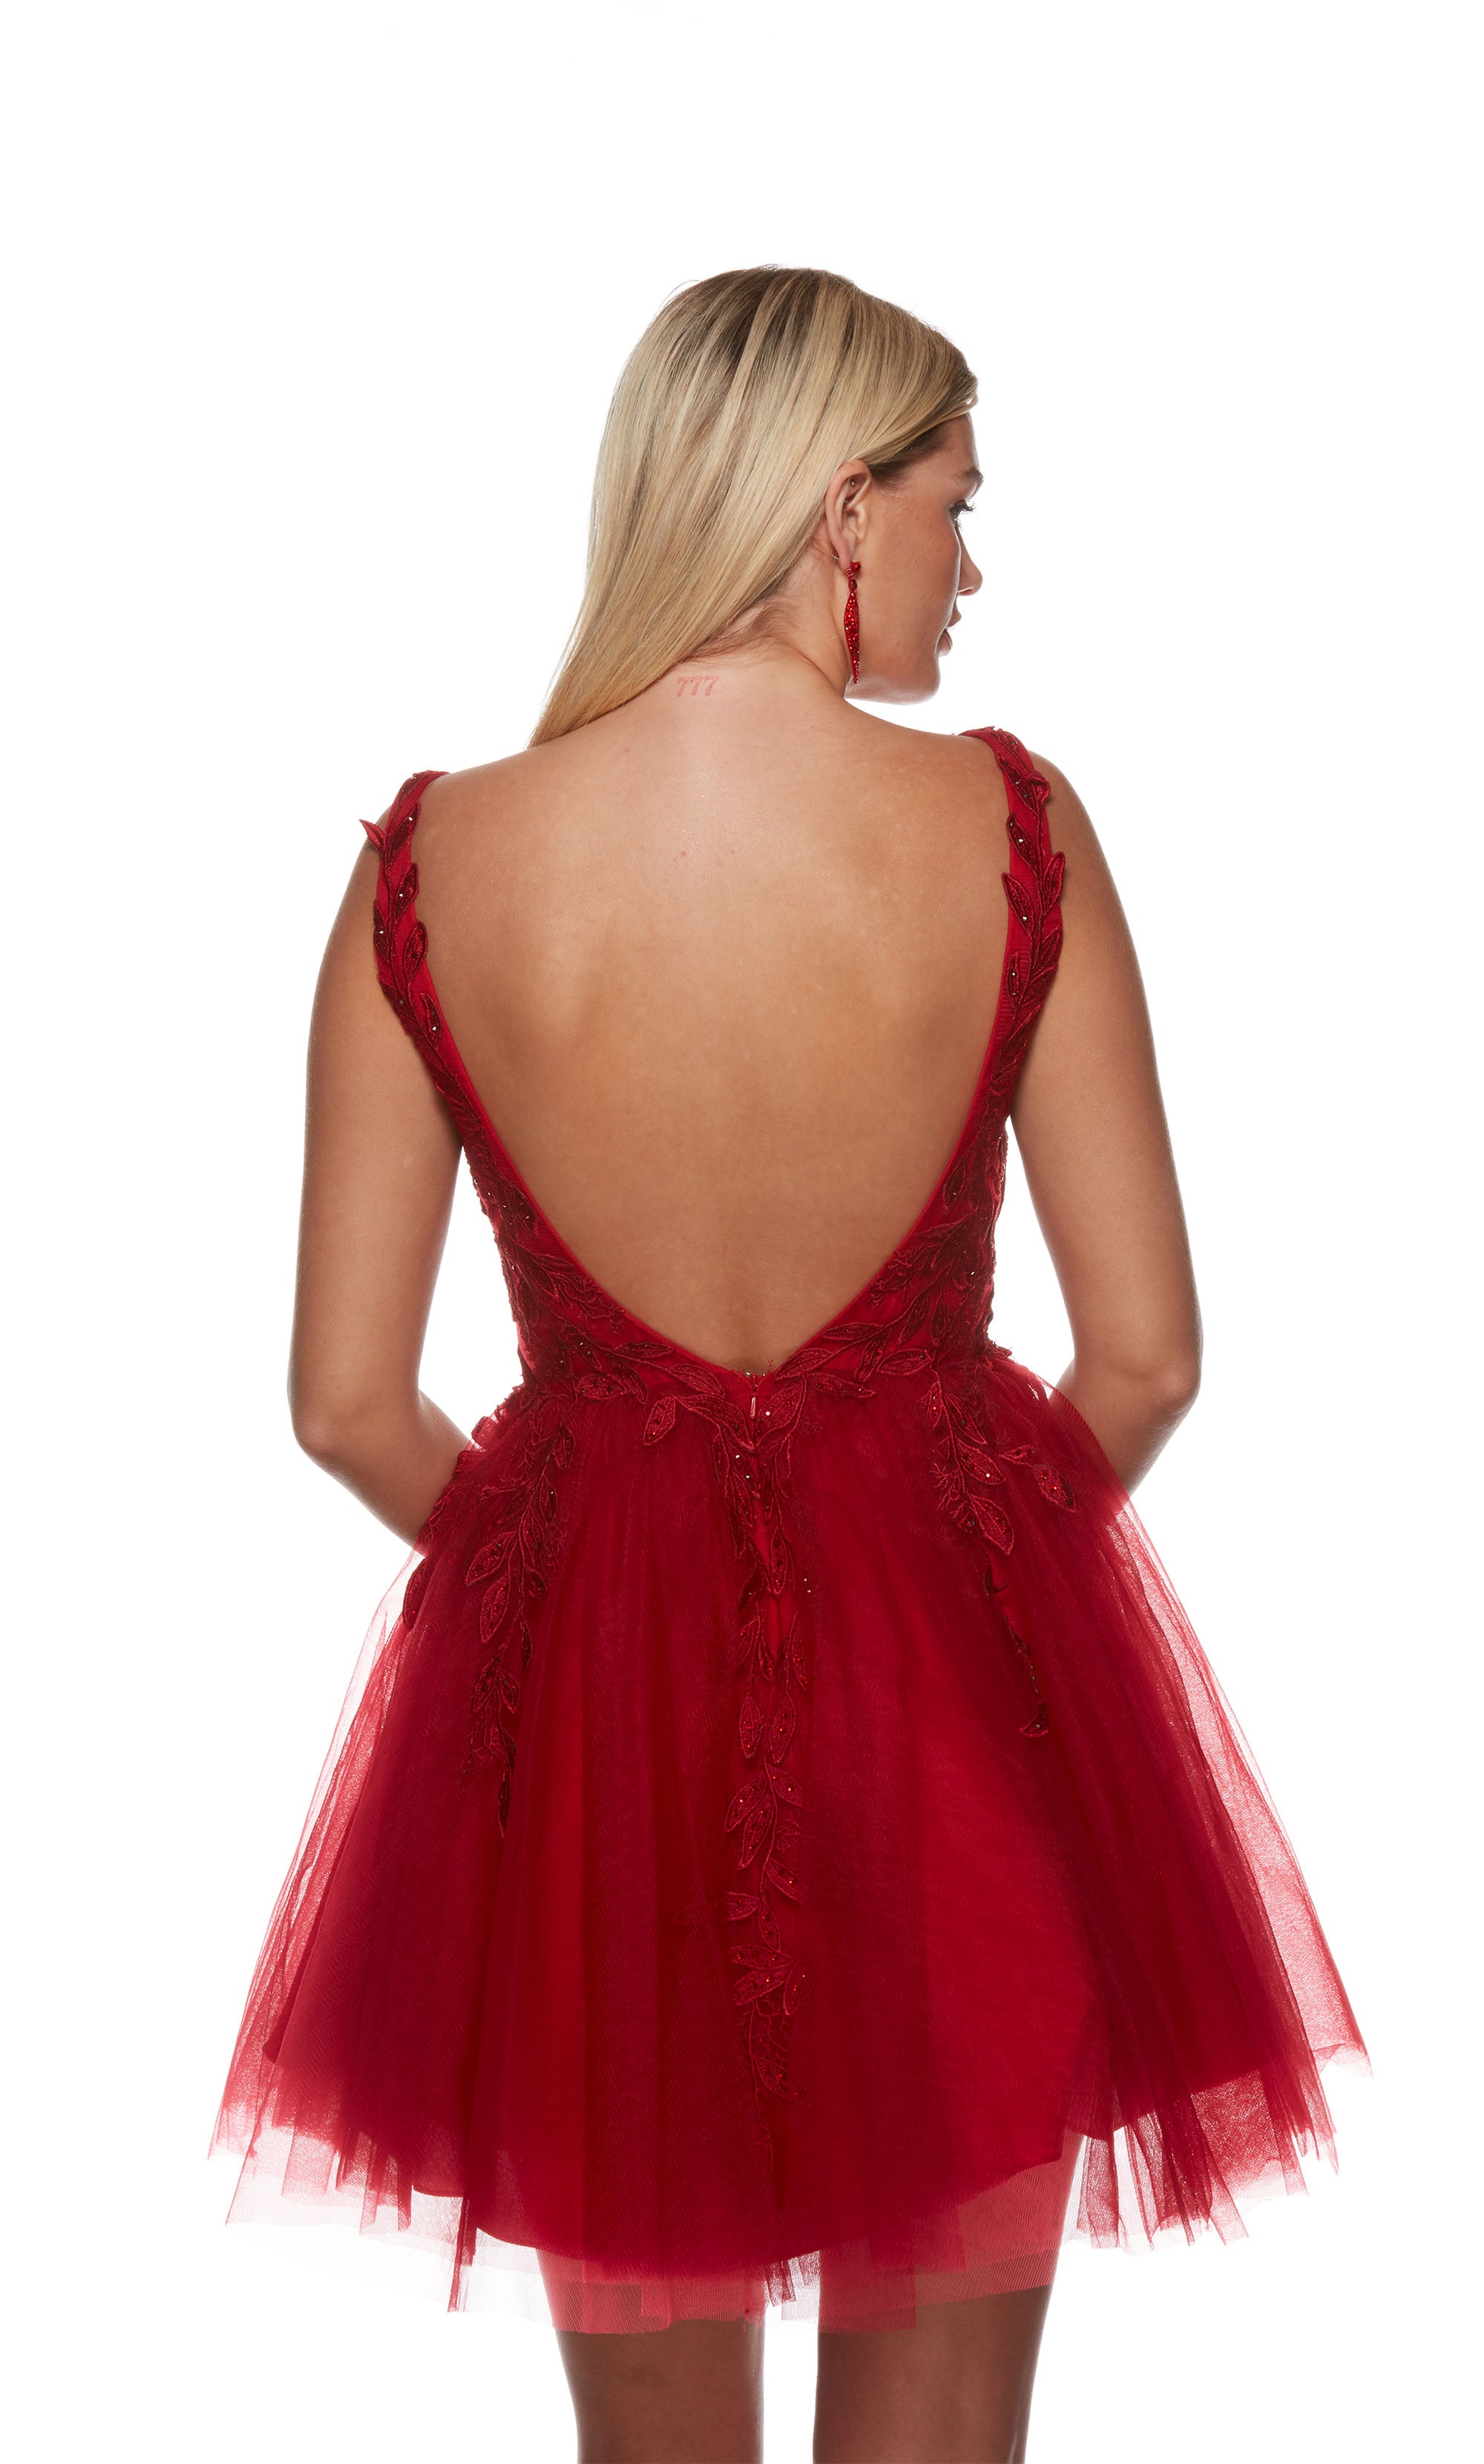 A red, V-neck short formal dress with floral appliques and a fitted waistline. The skirt is made of layered tulle. Shop our latest collection of gorgeous designer dresses by ALYCE Paris.